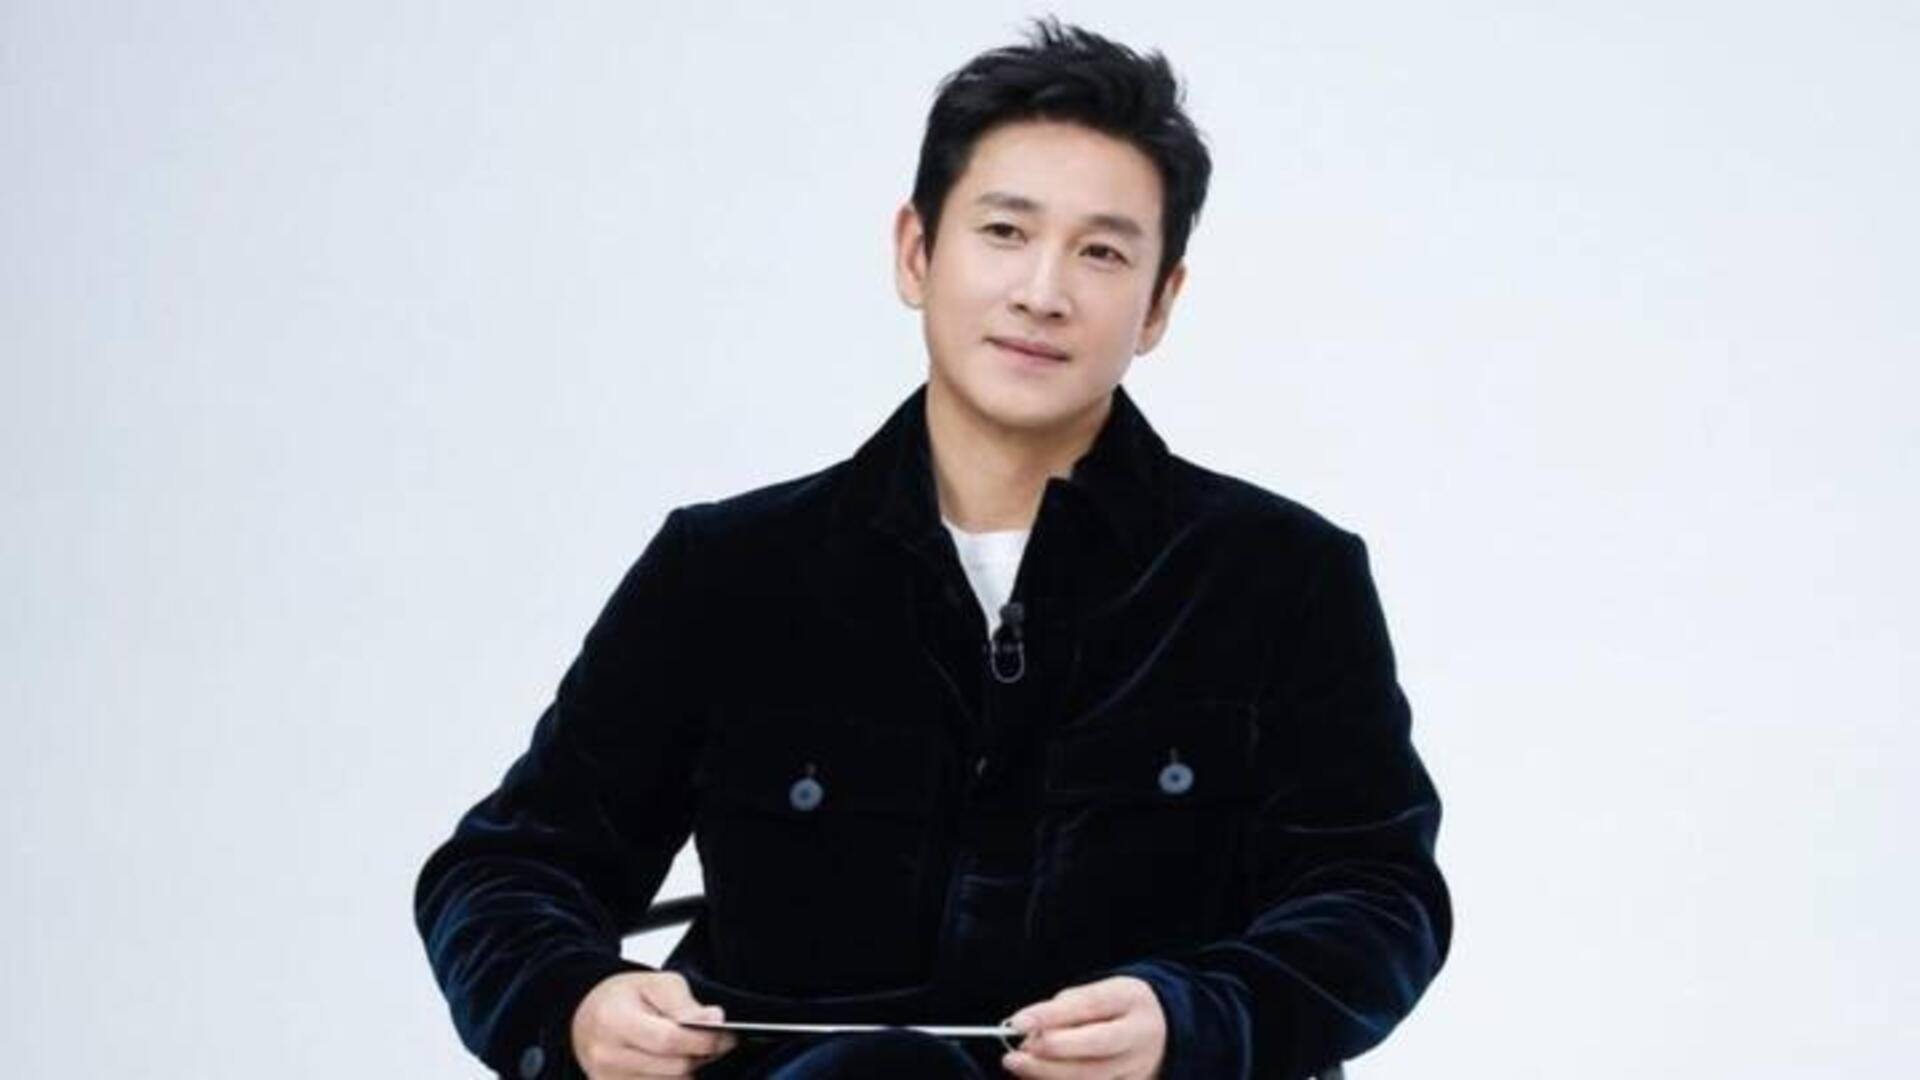 Fans outraged over Lee Sun-kyun's suspected suicide; allege harassment, bullying